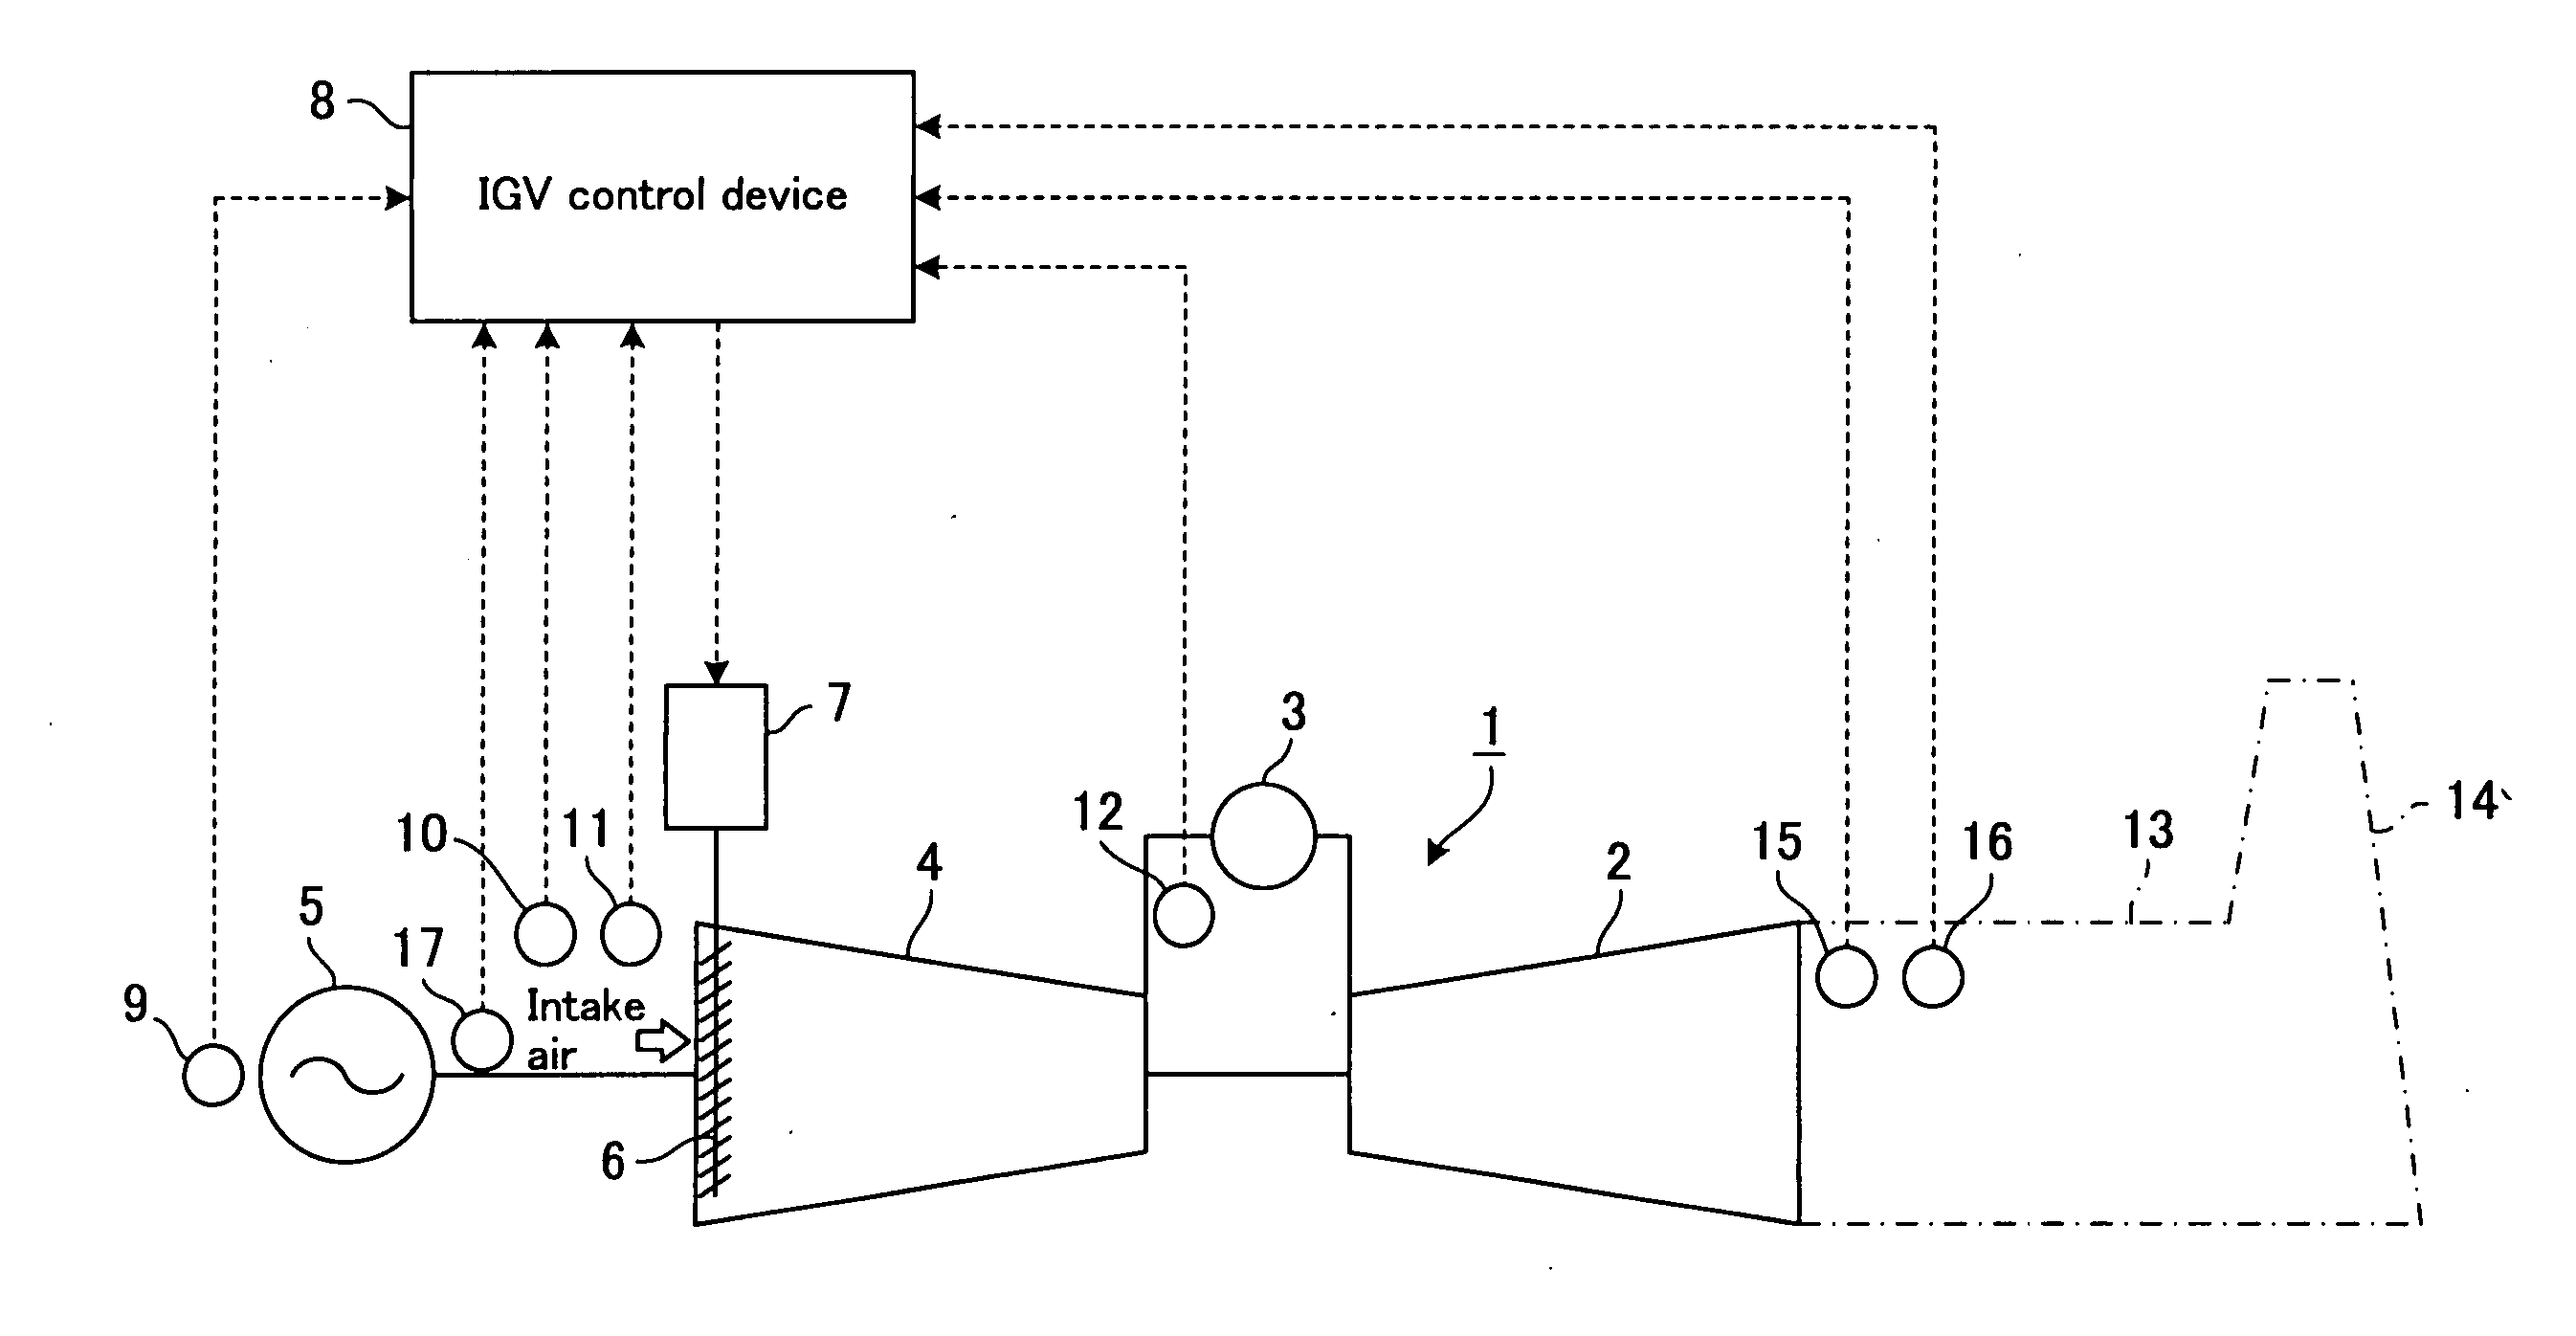 Inlet guide vane control device of gas turbine